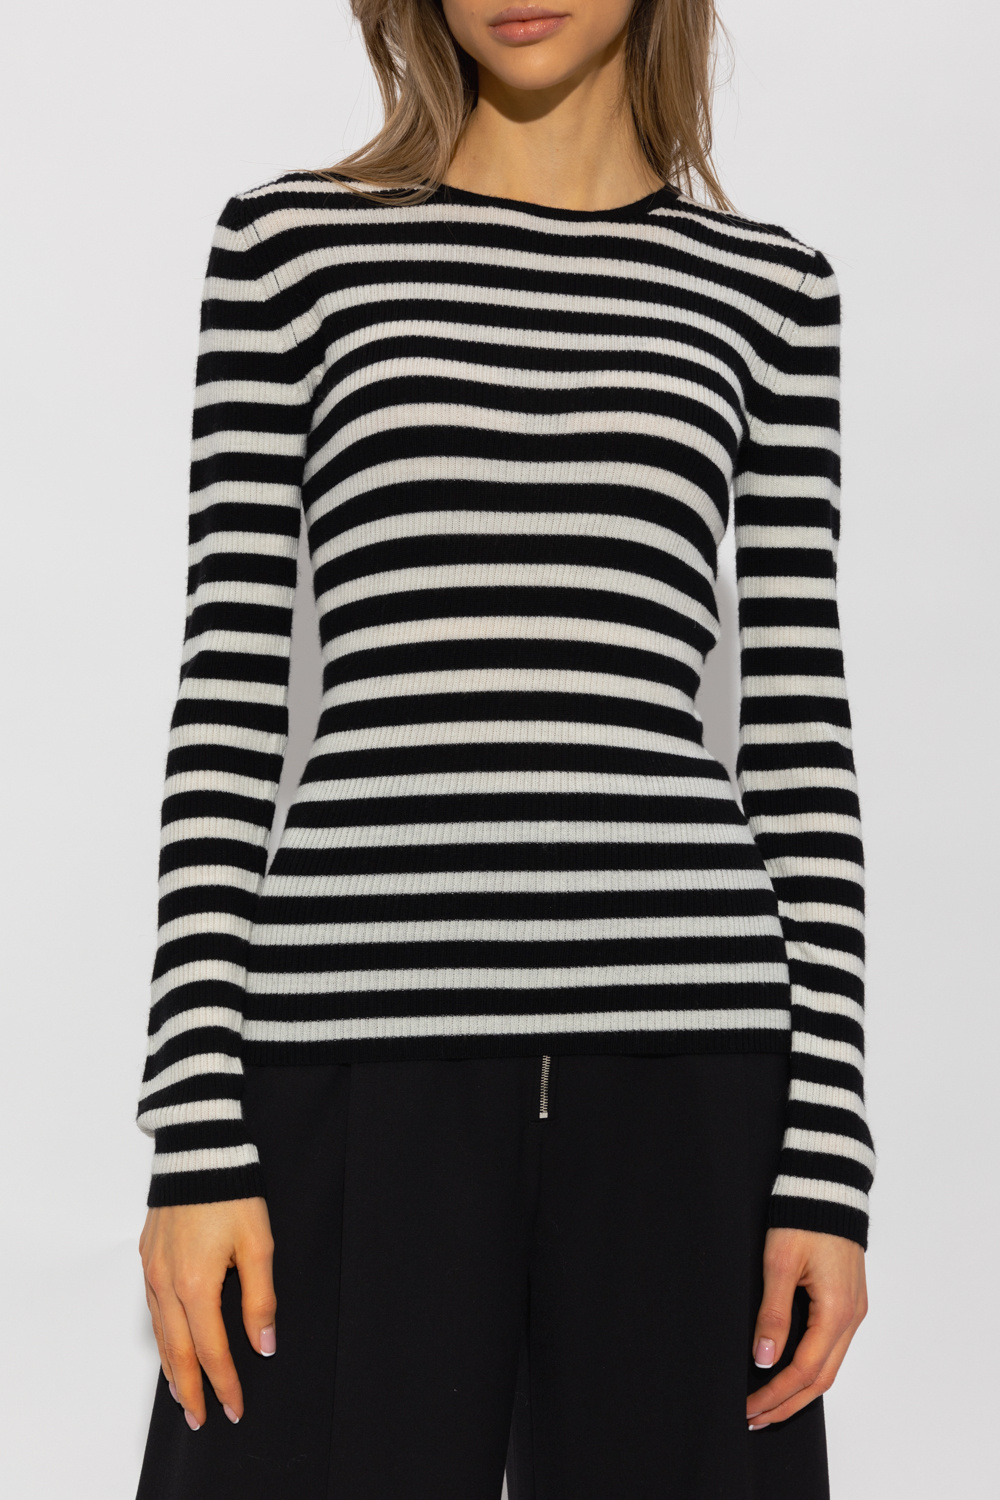 HERSKIND ‘Camb’ Shirts sweater